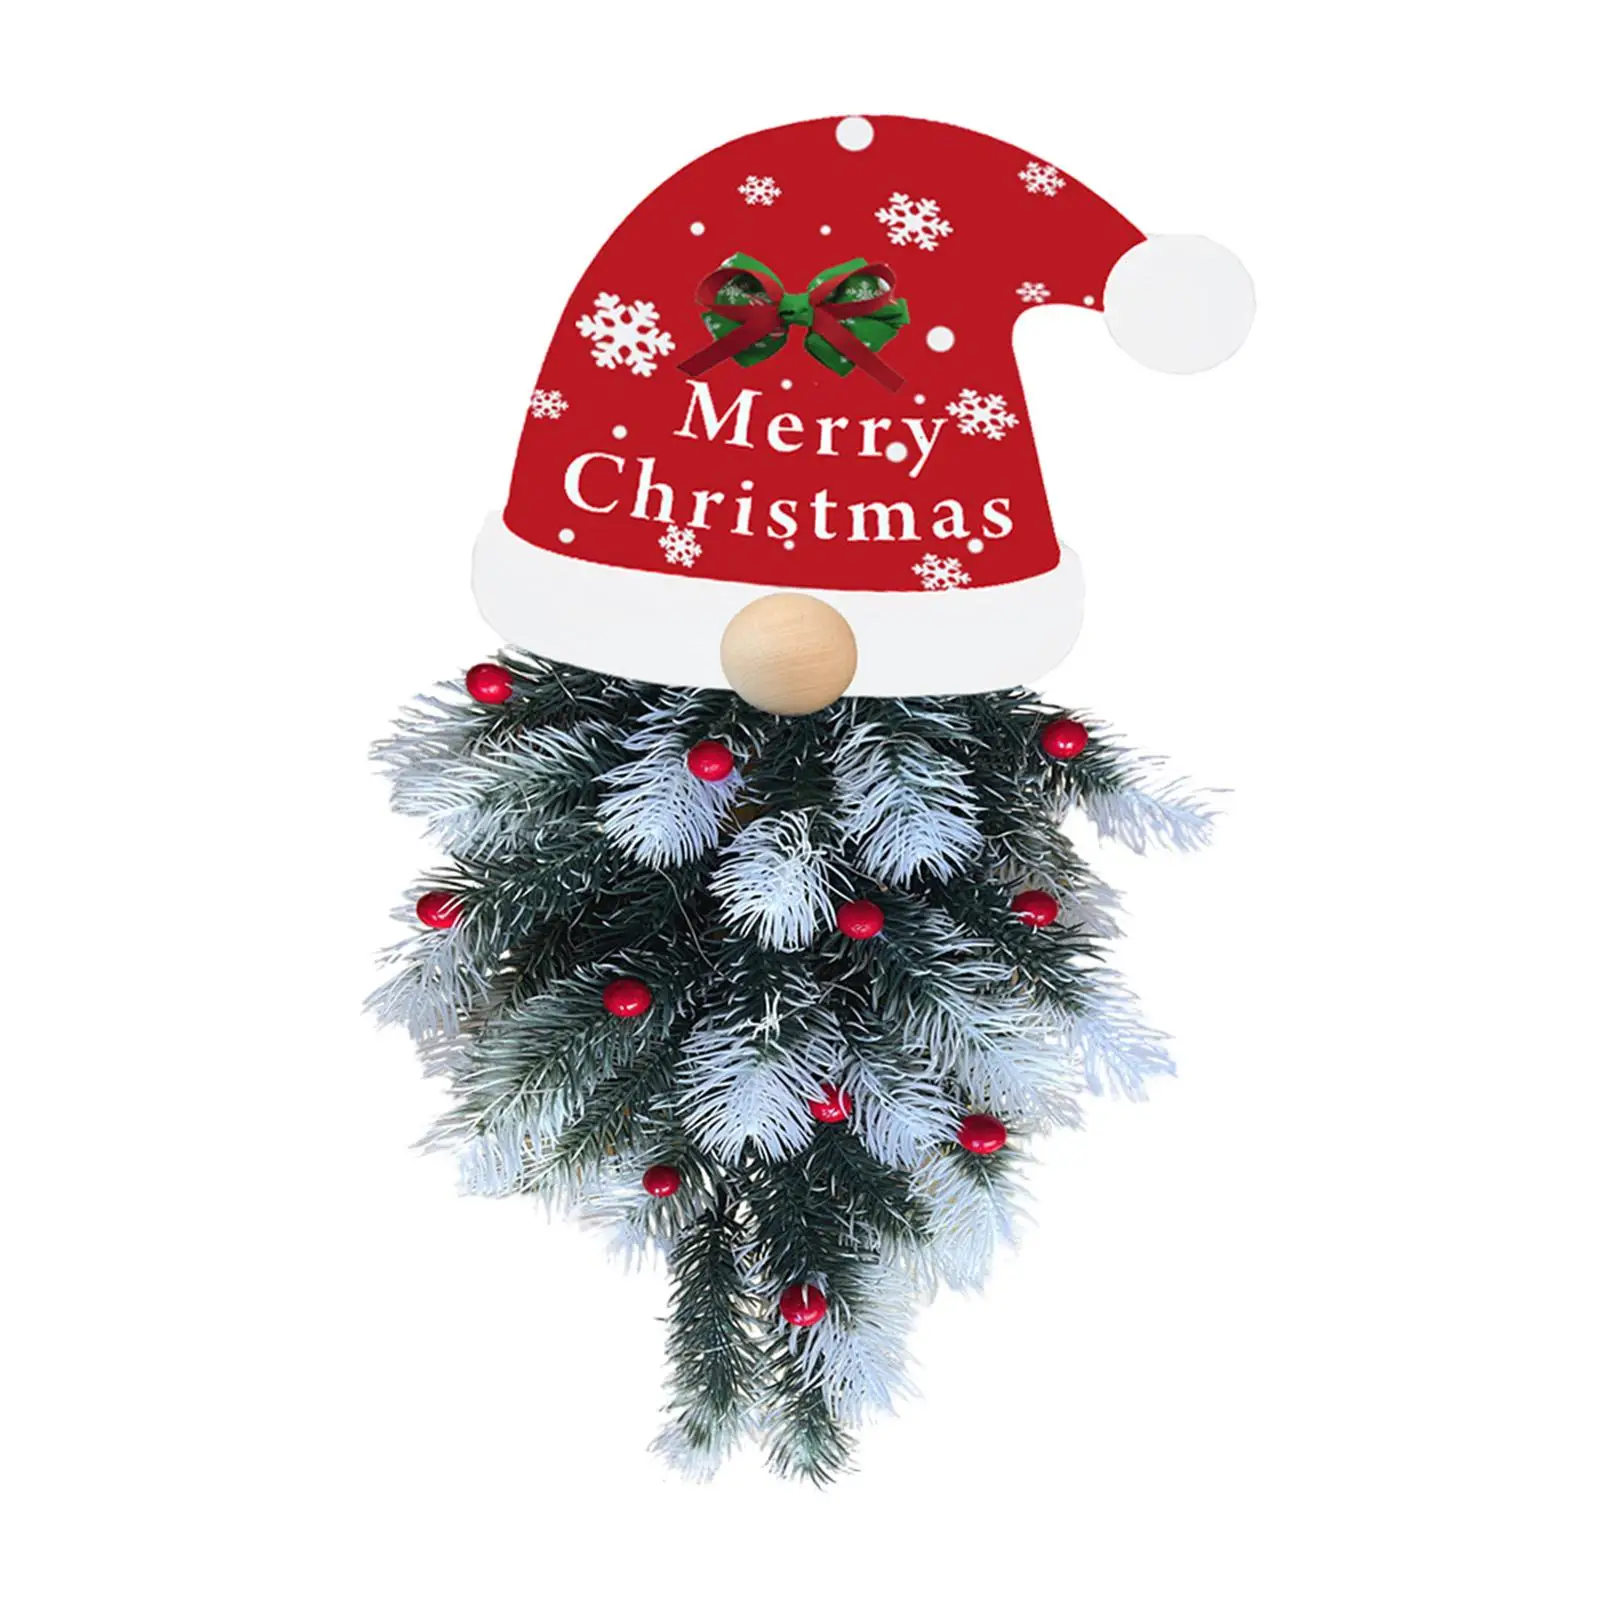 Artificial Christmas Swag with Lights Christmas Decoration for Stairs Walls